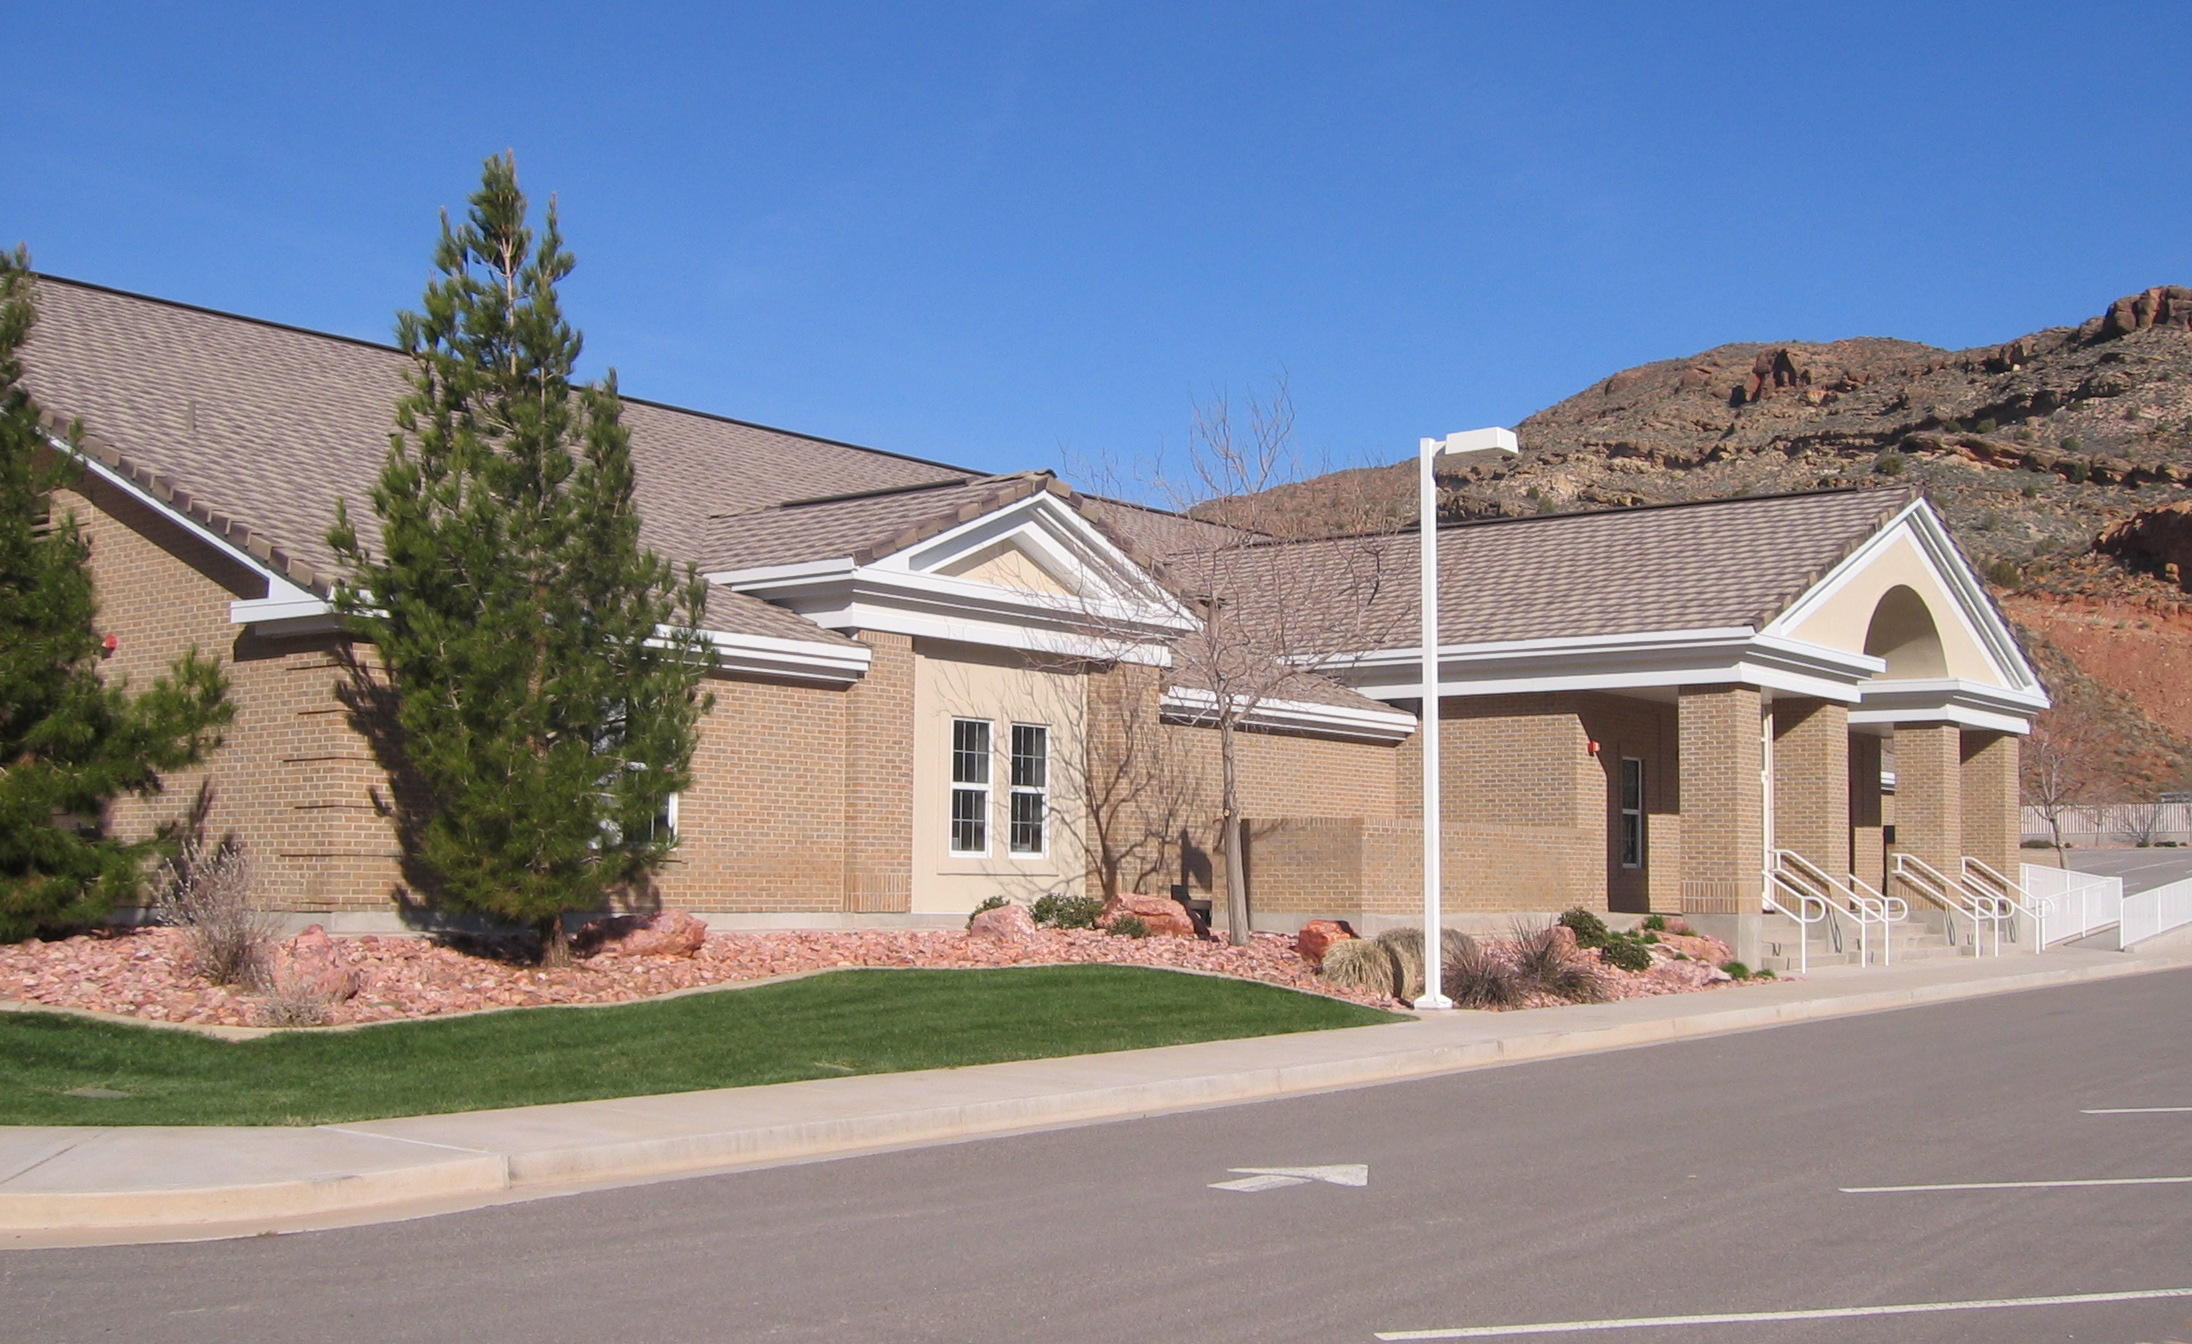 Right side of the new Gunlock church building